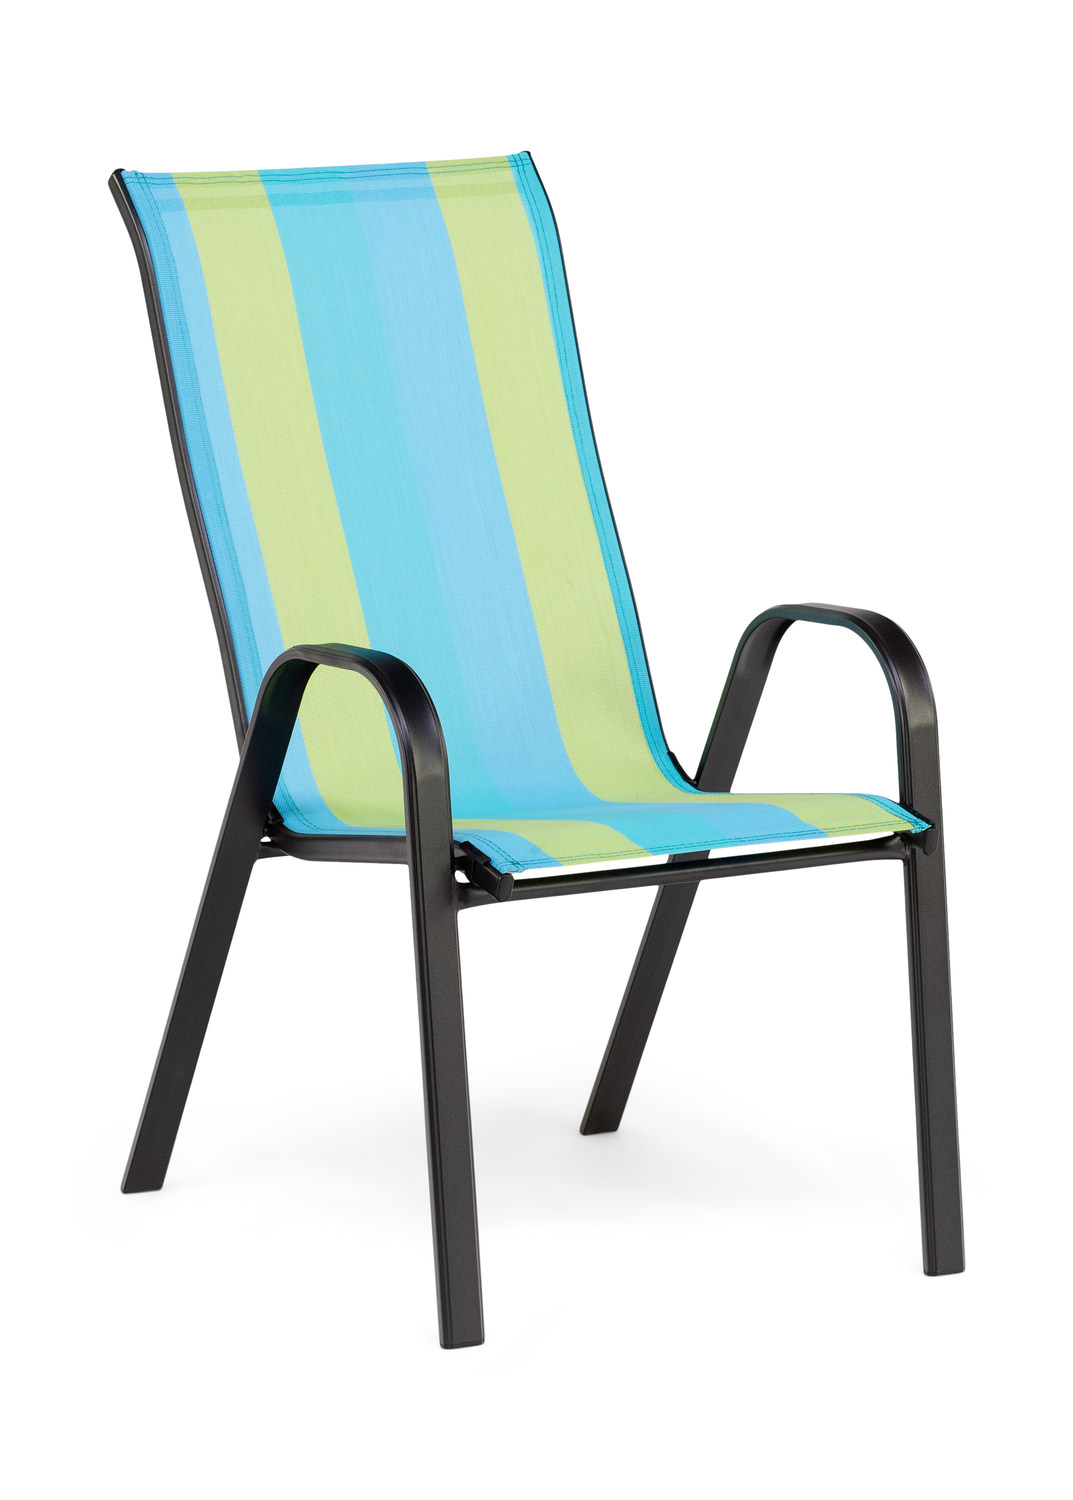 14 Best Patio Chairs We Love 2021